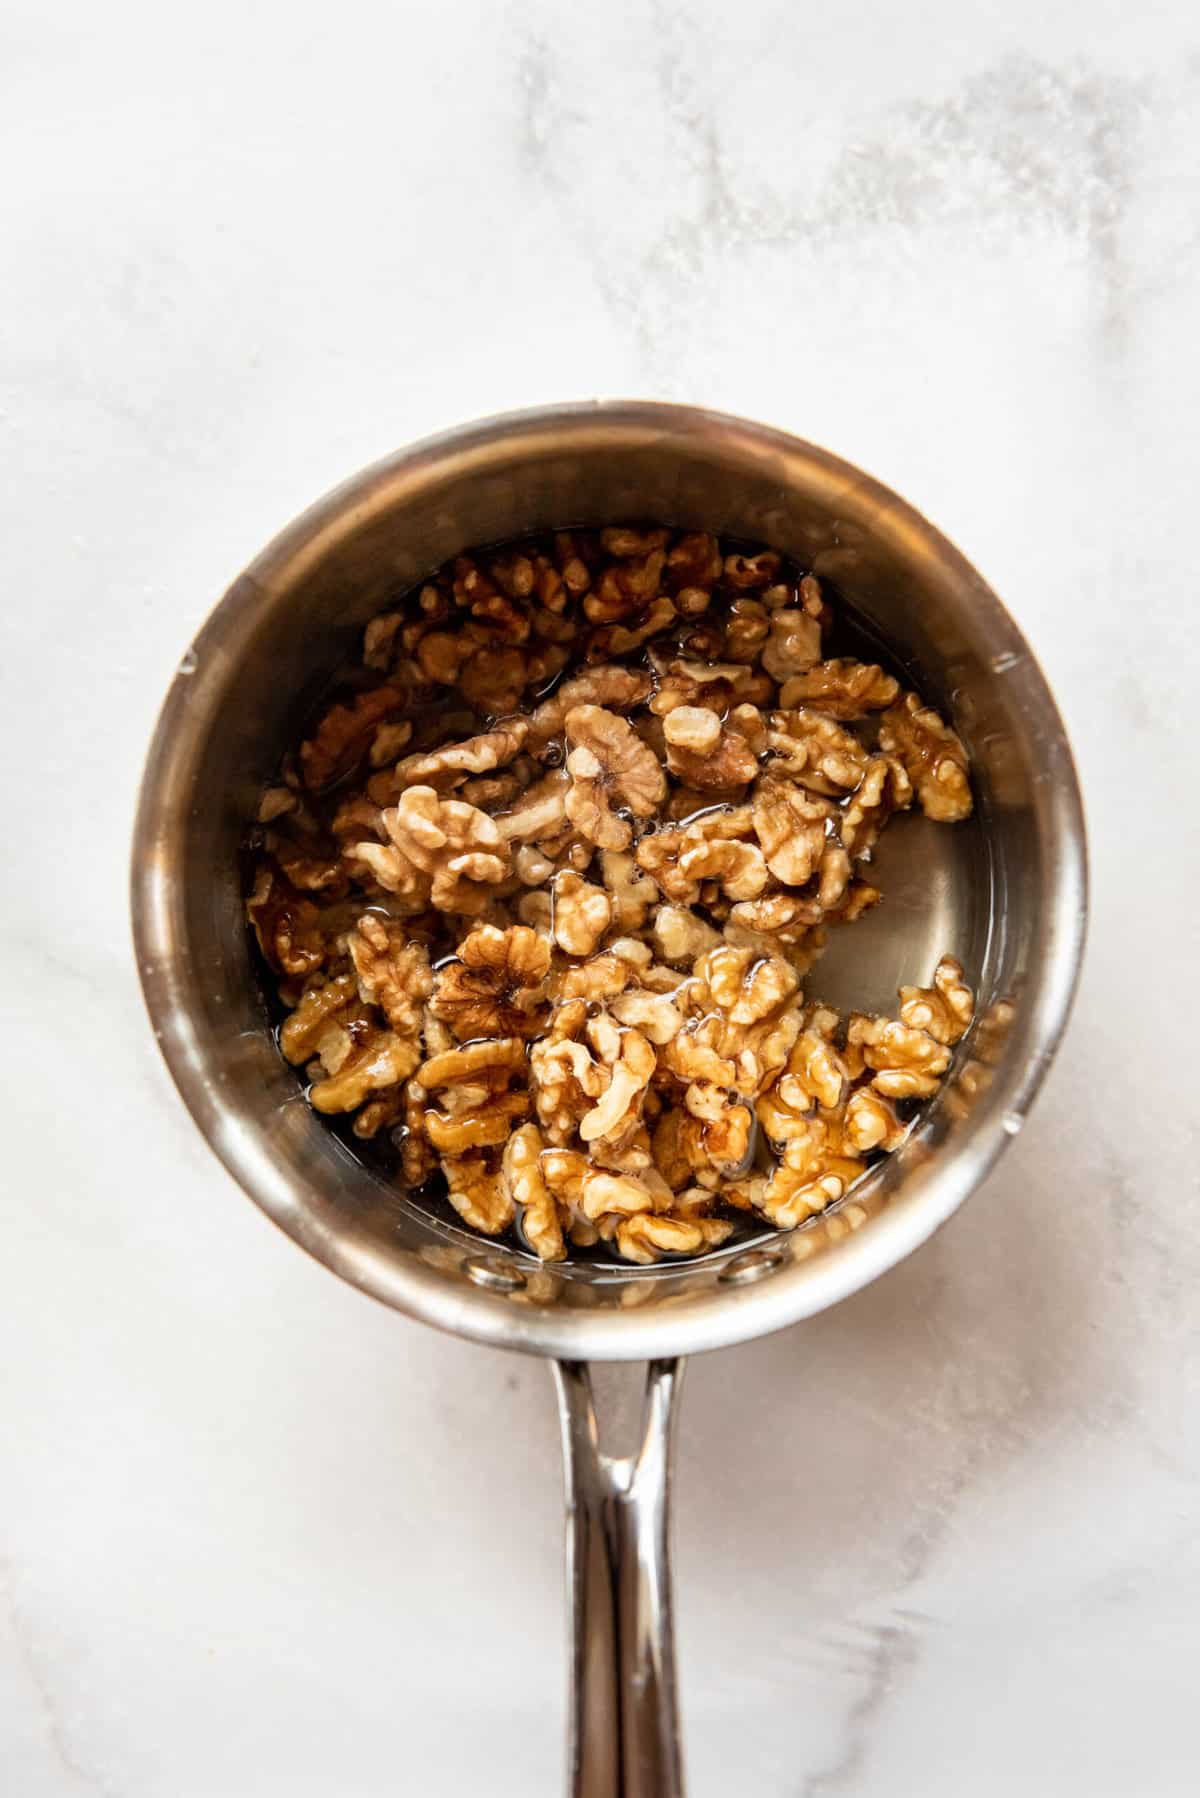 Whole walnuts in a saucepan with sugar and water.